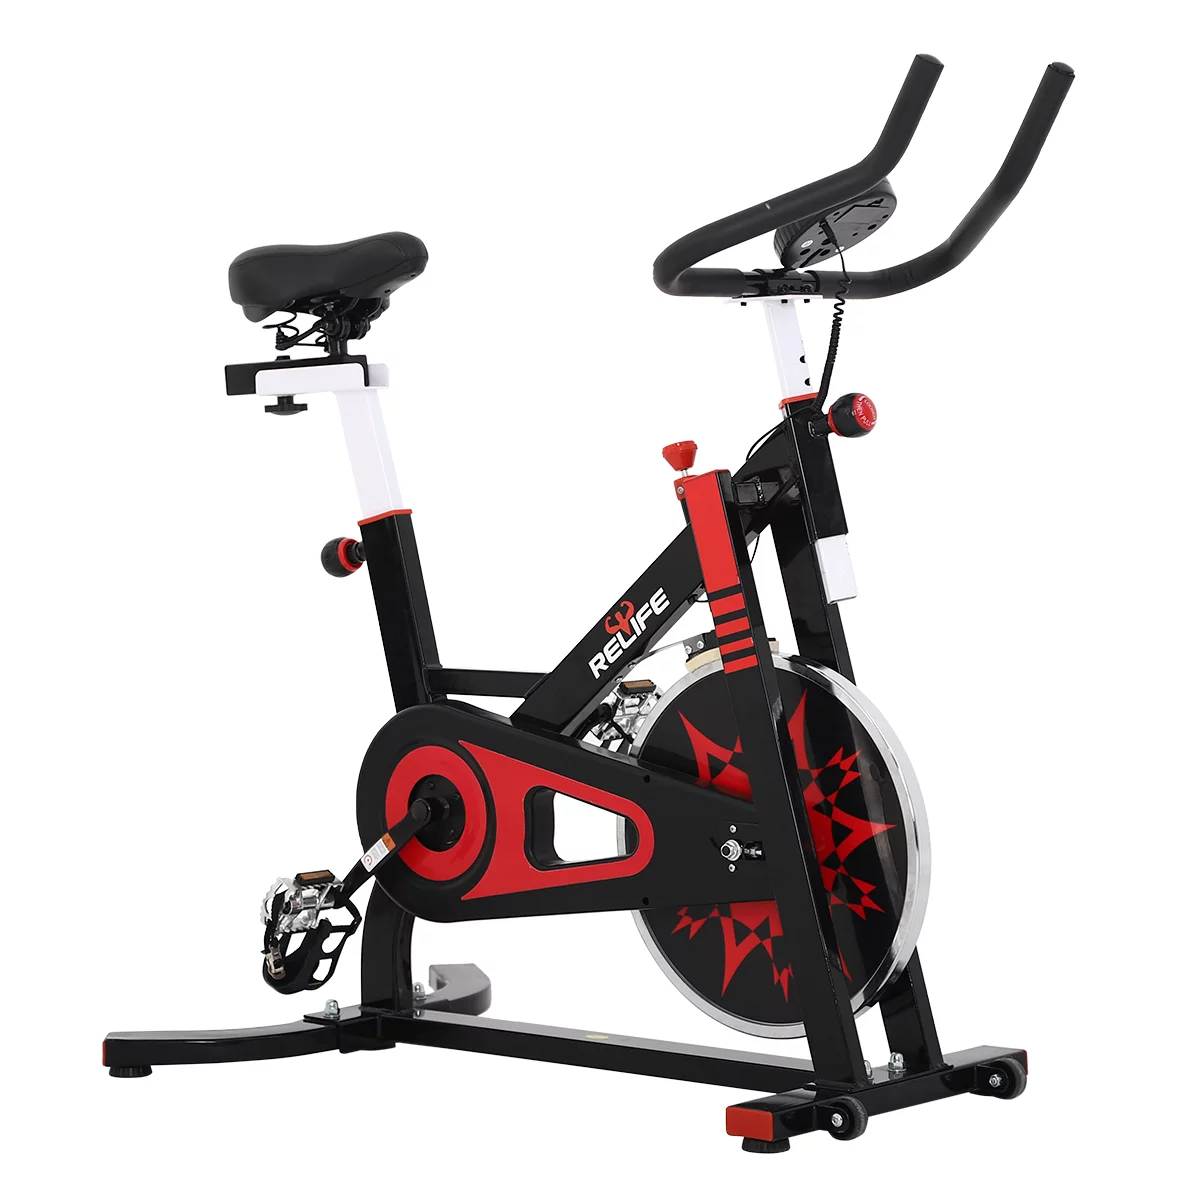 Review of the Relife Exercise Bike